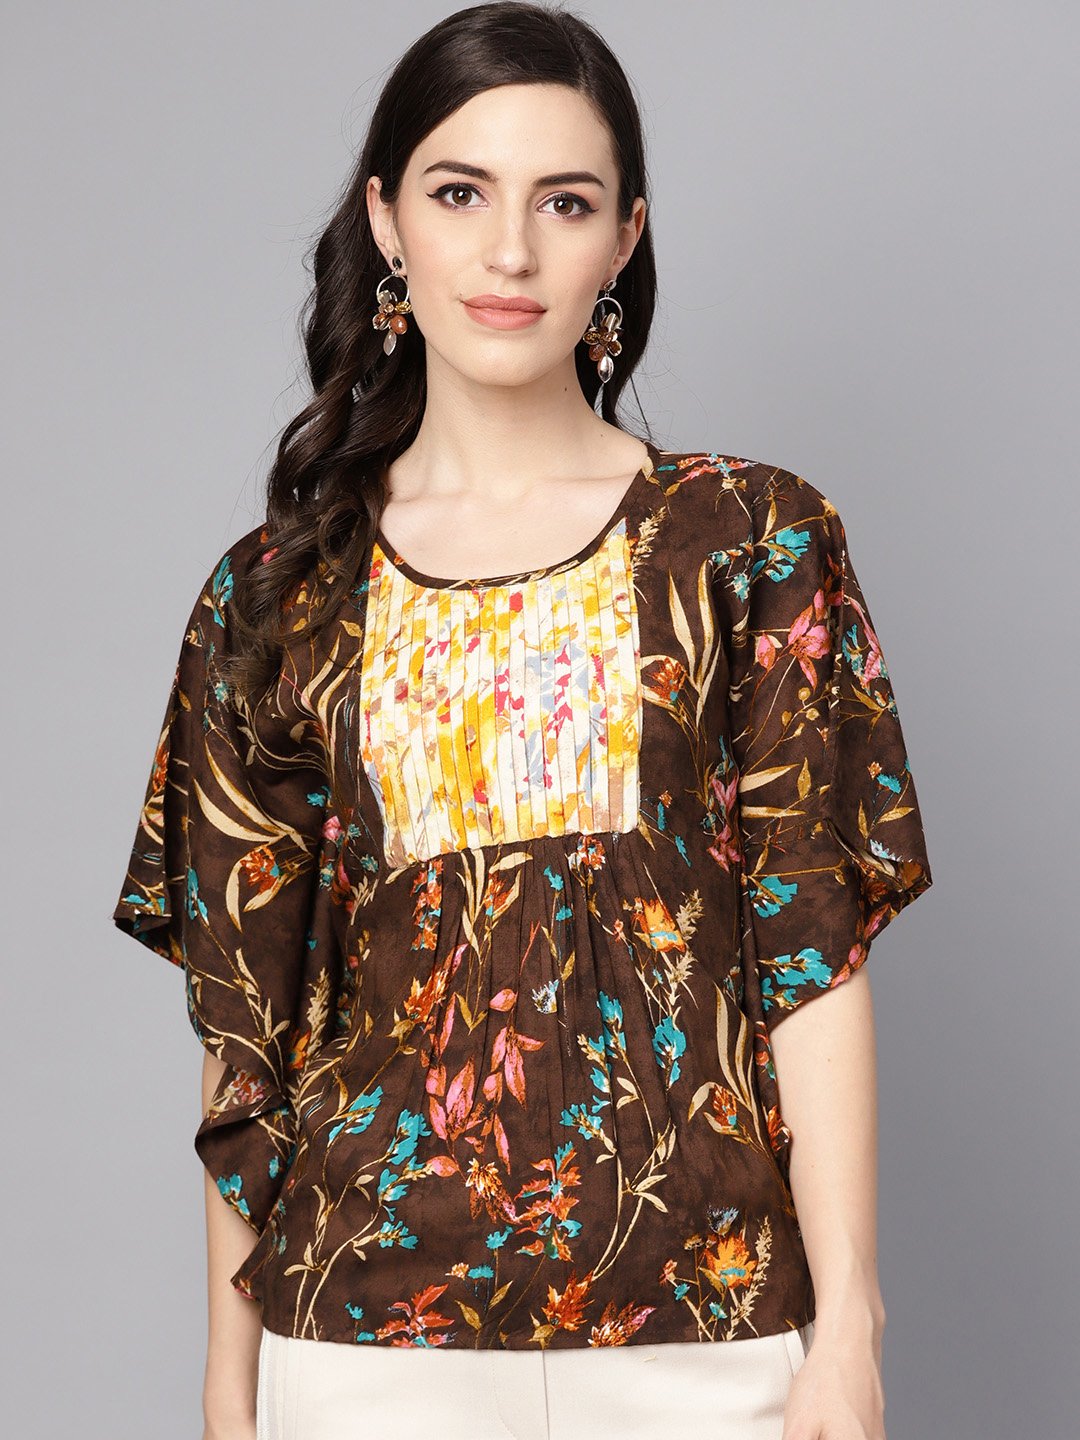 Women's Chocolate Brown Multi Colored  Kaftaan Top With Pleated Yoke - Nayo Clothing